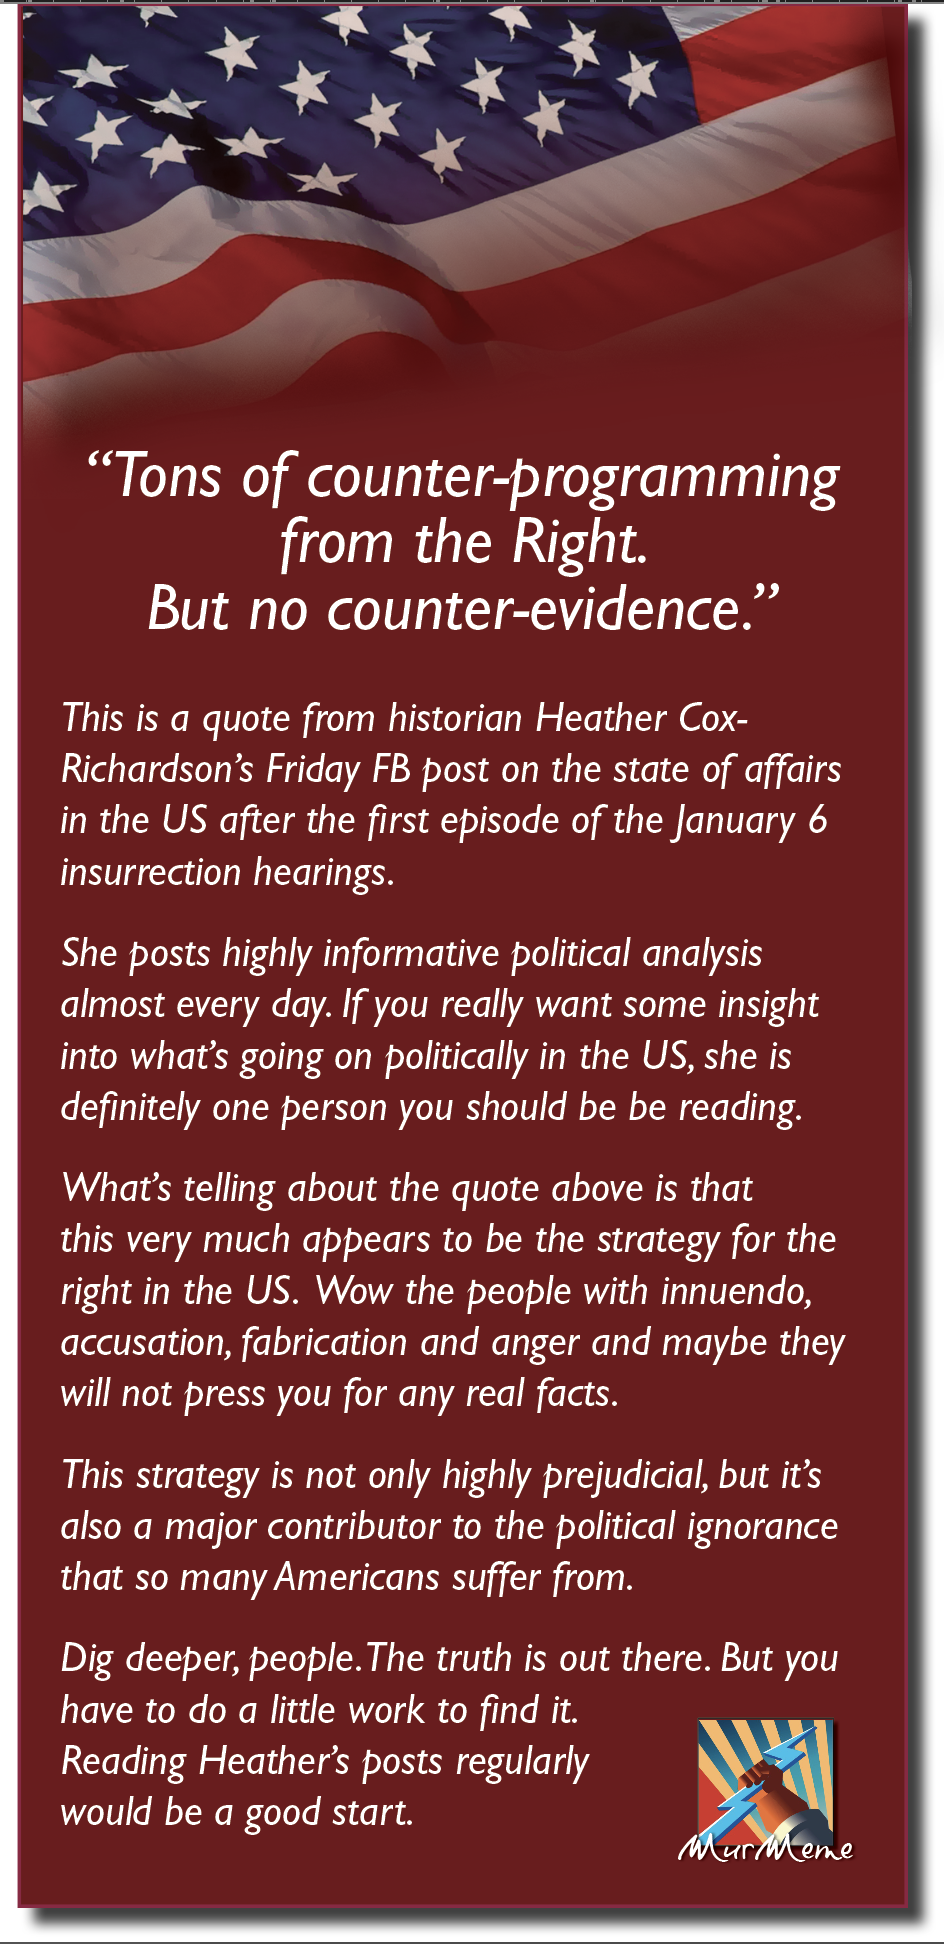 Ko
a

BL

“Tons of counter-programming
from the Right.
But no counter-evidence.”

This is a quote from historian Heather Cox-
Richardson’s Friday FB post on the state of affairs
in the US after the first episode of the January 6
insurrection hearings.

She posts highly informative political analysis
almost every day. If you really want some insight
into what's going on politically in the US, she is
definitely one person you should be be reading.

What's telling about the quote above is that

this very much appears to be the strategy for the
right in the US. Wow the people with innuendo,
accusation, fabrication and anger and maybe they
will not press you for any real facts.

This strategy is not only highly prejudicial, but it’s
also a major contributor to the political ignorance
that so many Americans suffer from.

Dig deeper, people.The truth is out there. But you
have to do a little work to find it.

Reading Heather's posts regularly Px
bh,

would be a good start.